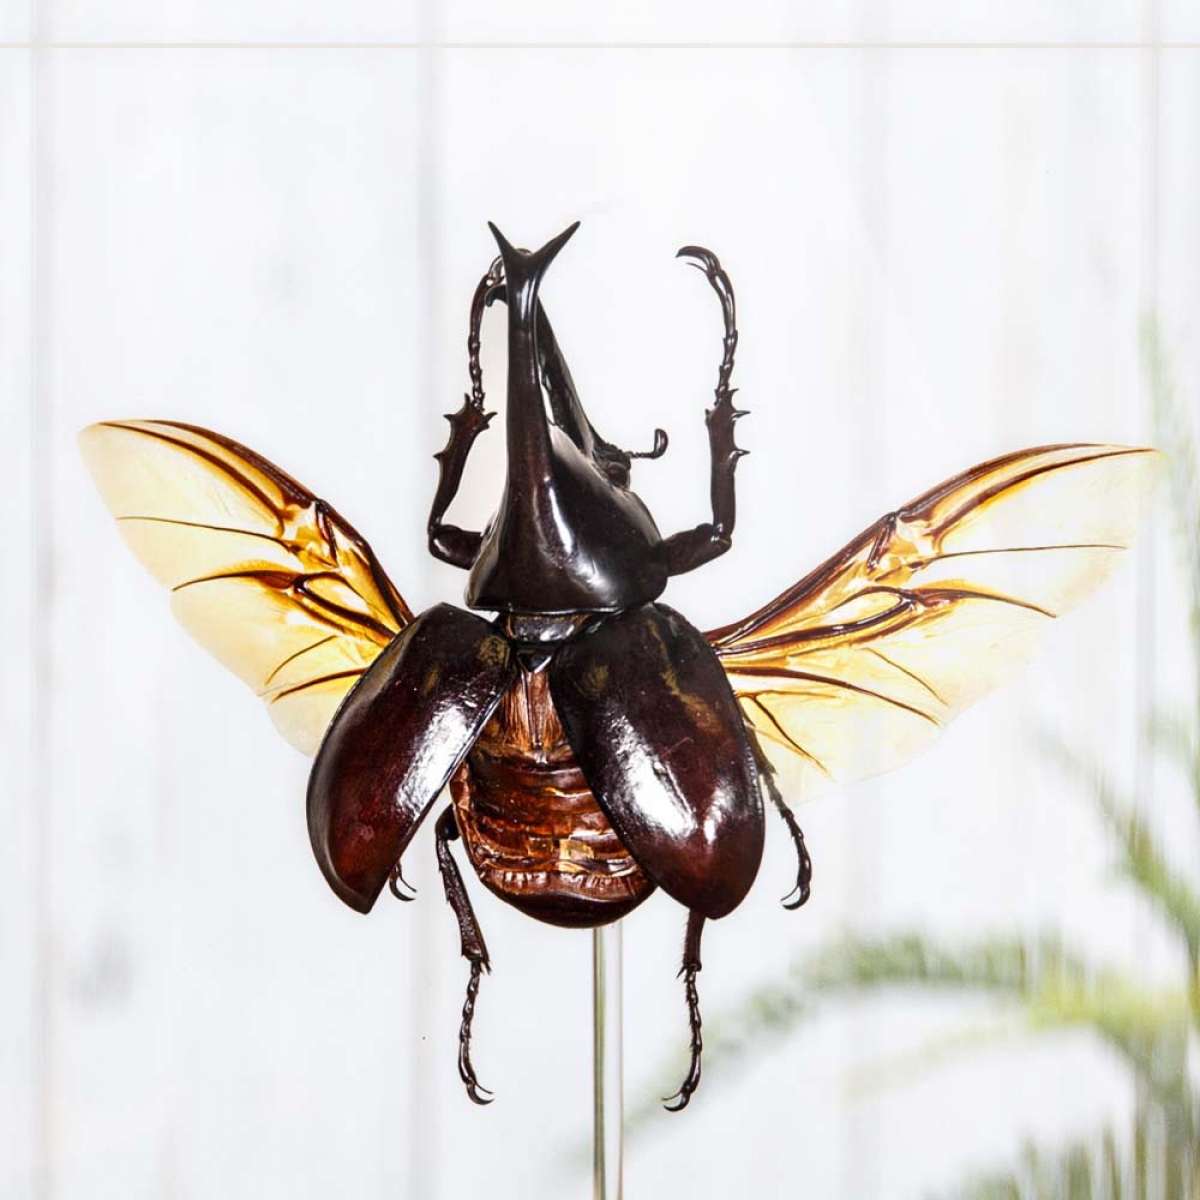 Siamese Rhinoceros Beetle in Glass Dome with Wooden Base (Xylotrupes gideon)